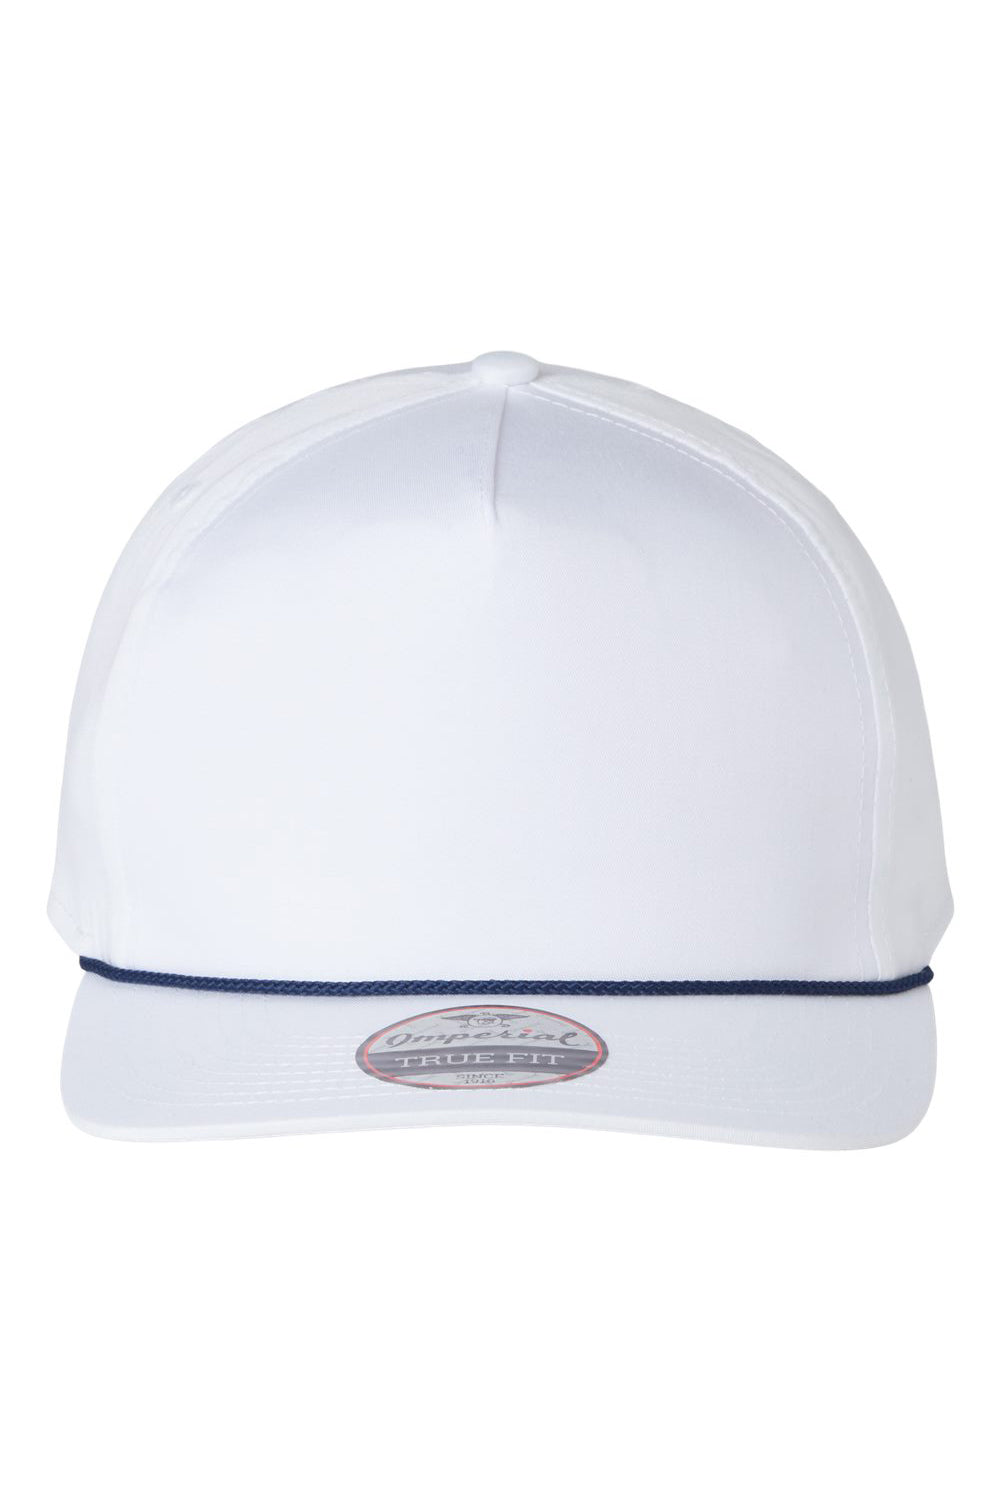 Imperial 5056 Mens The Barnes Hat White/Navy Blue Flat Front